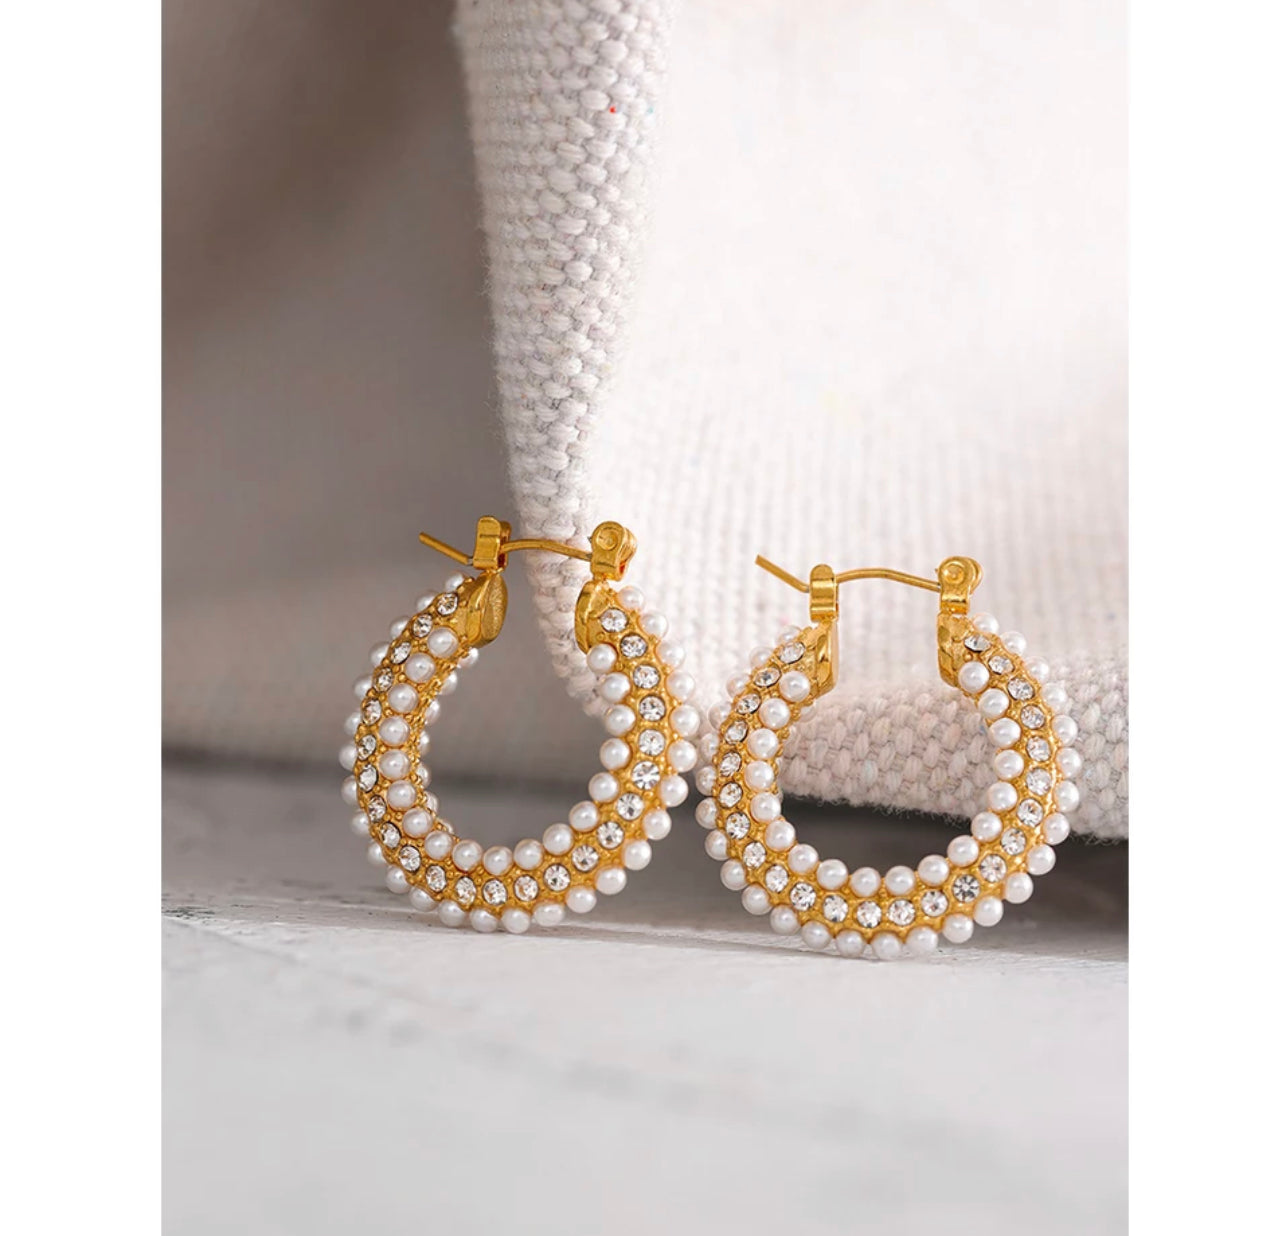 Stainless Steel Pearls with CZ Embellishment Hoops Earrings